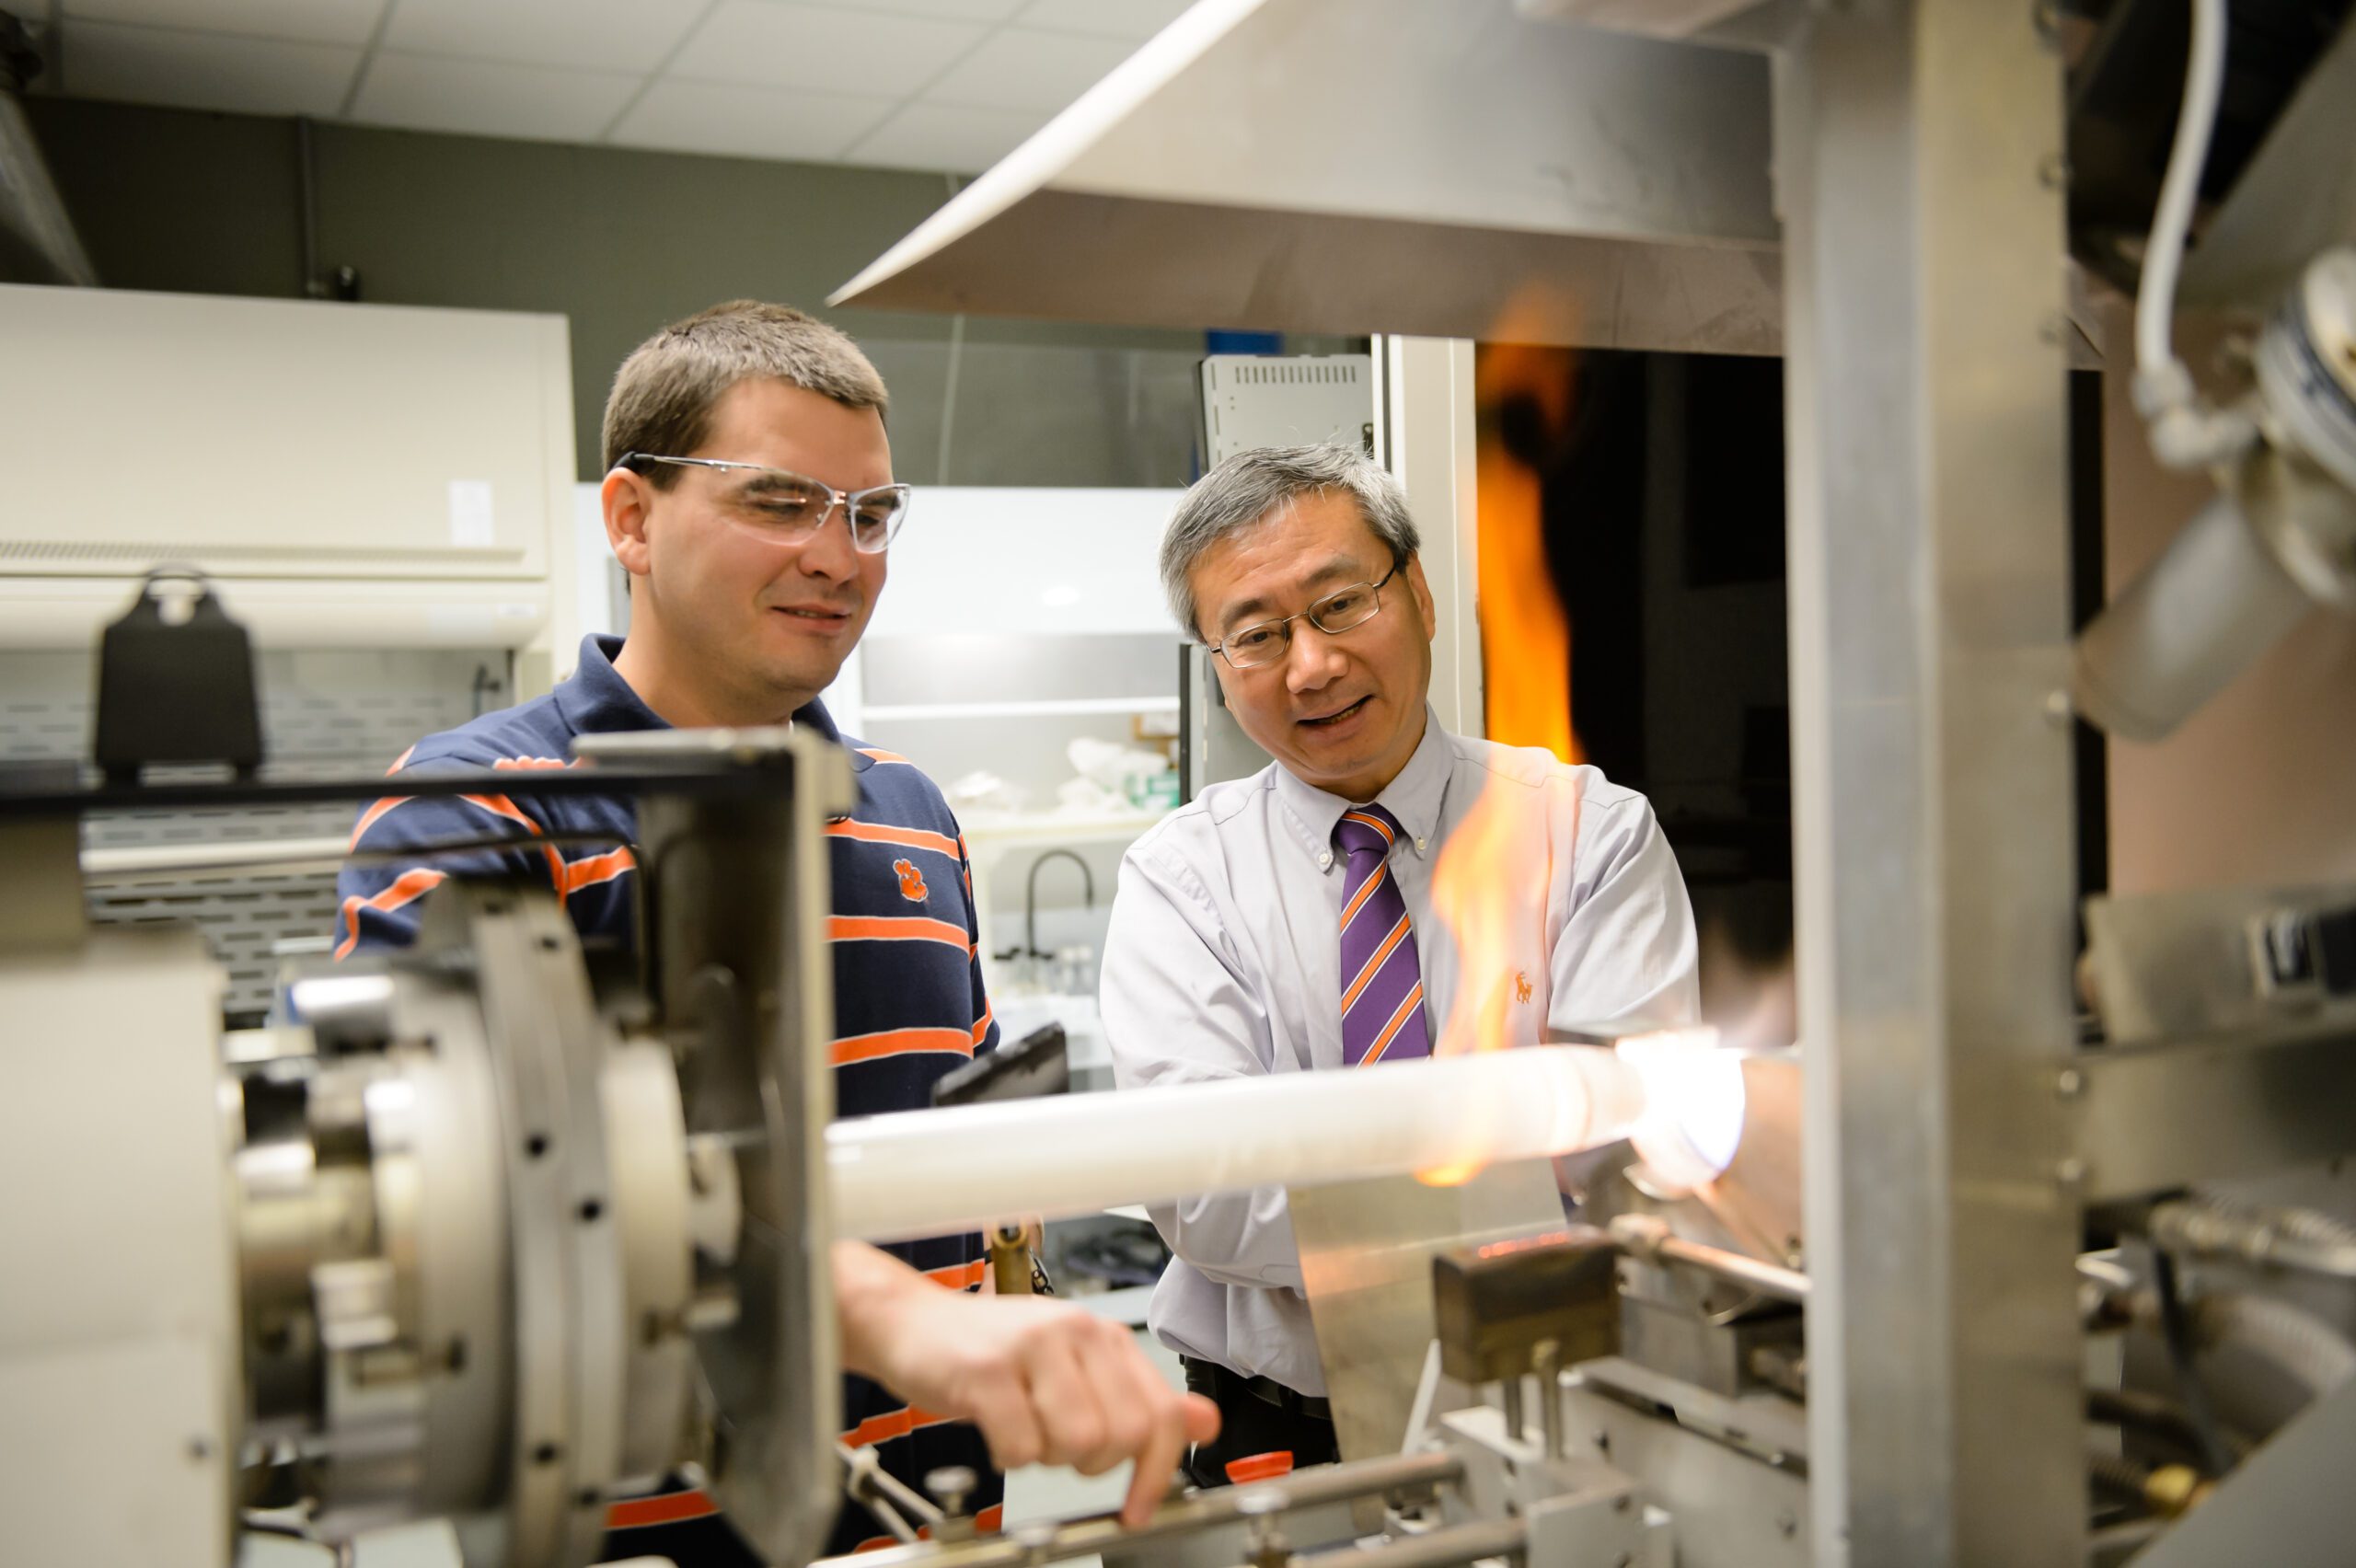 An Asian Clemson professor wearing glasses and a purple and orange tie stands next to a male student wearing safety goggles and a Clemson polo shirt, and a tube of light with flames coming off of it is in the foreground. 